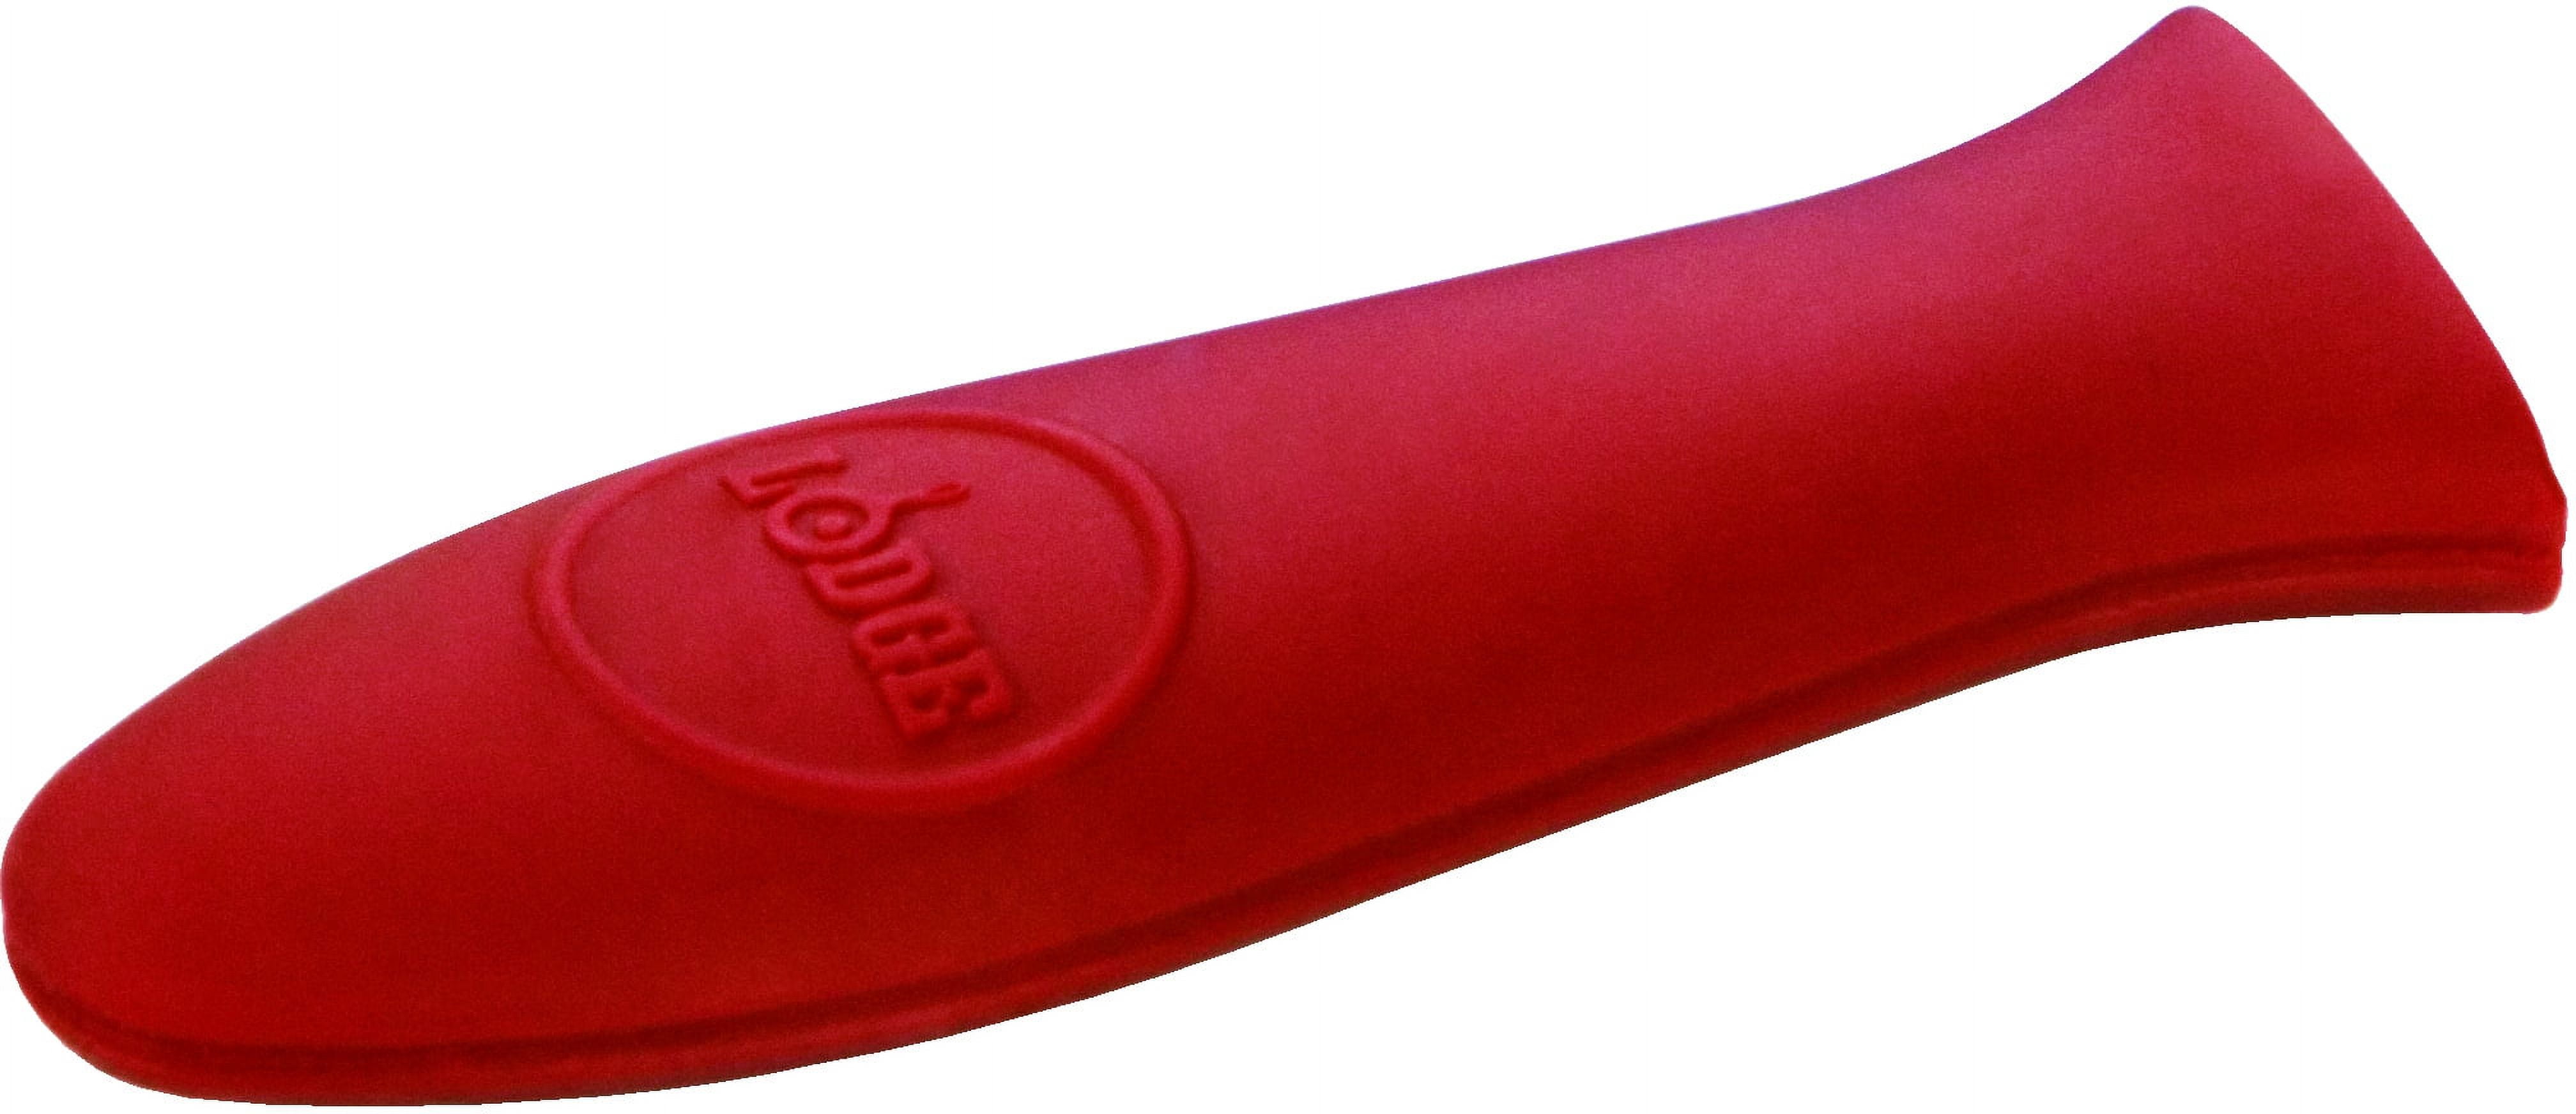 Lodge Silicone Hot Red Handle Sleeve 